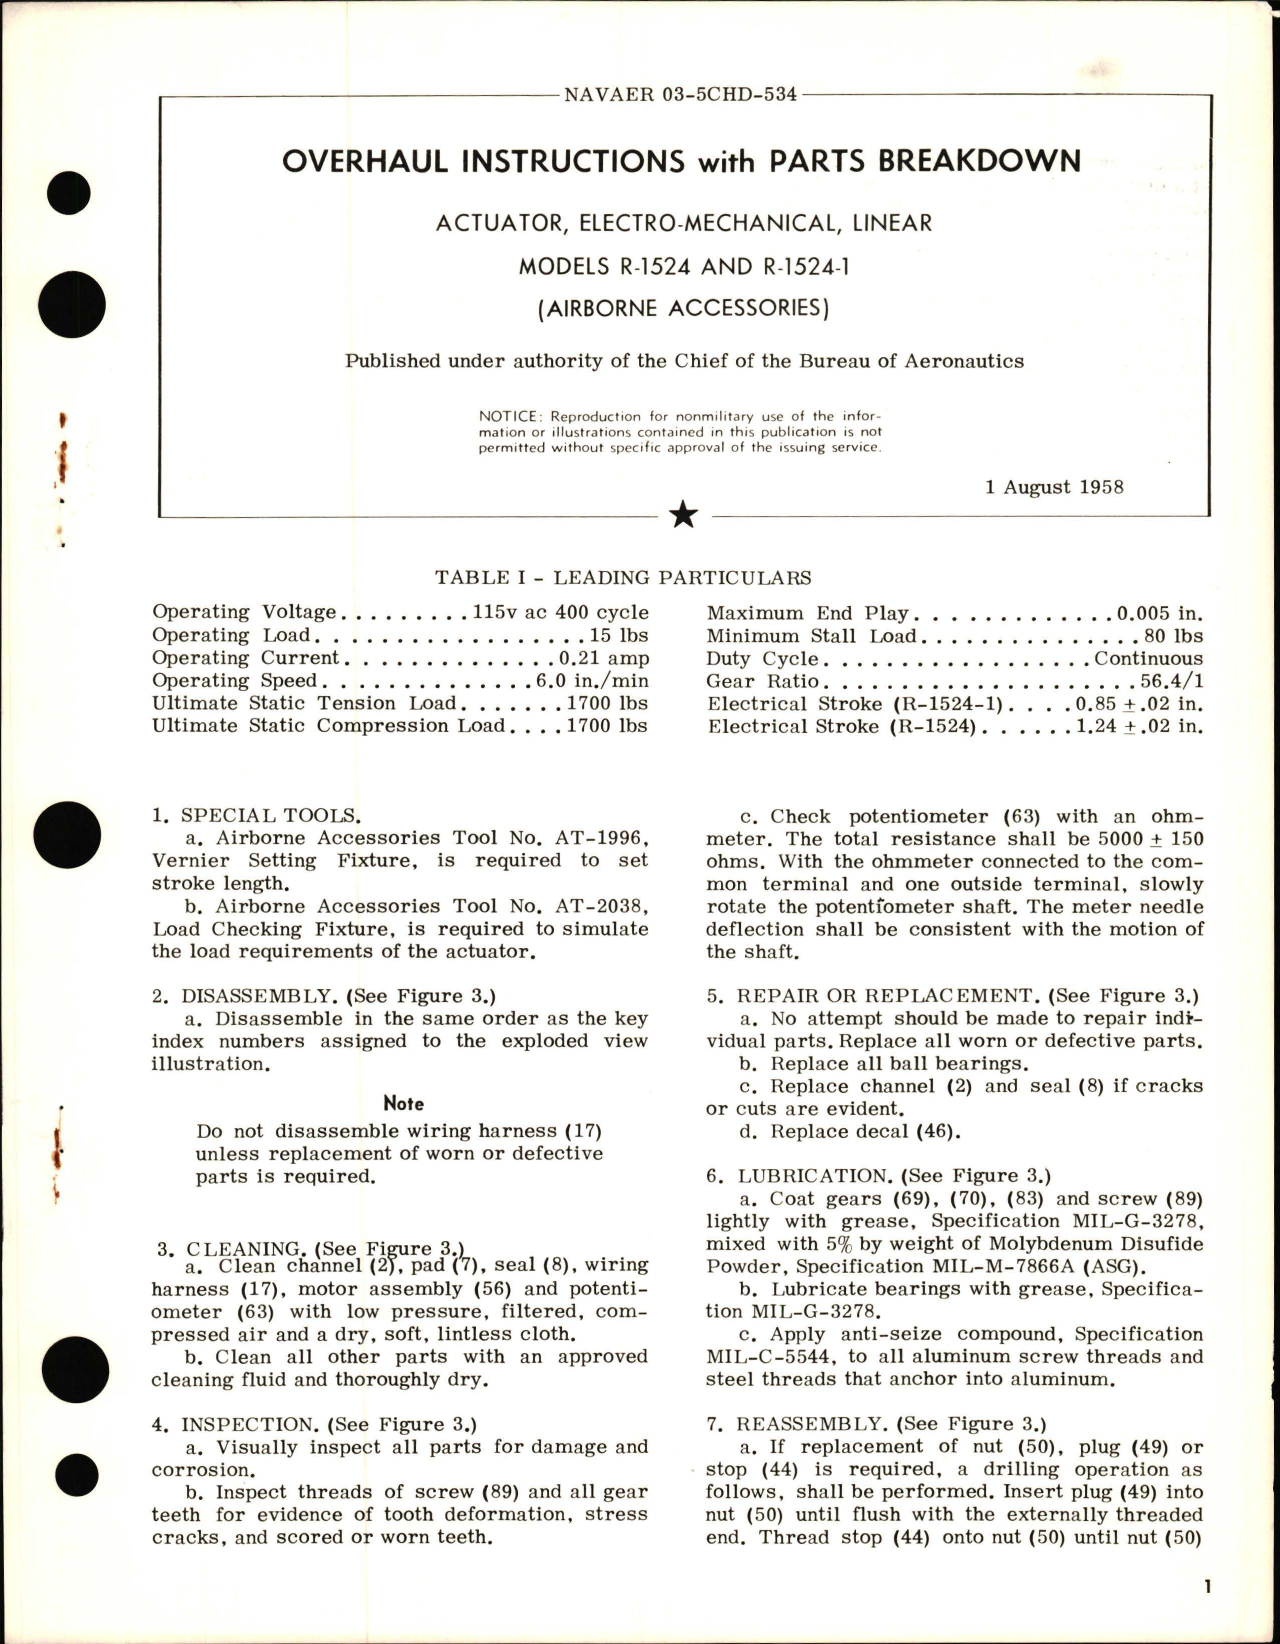 Sample page 1 from AirCorps Library document: Overhaul Instructions with Parts Breakdown for Actuator, Electro-Mechanical, Linear Models R-1524 and R-1524-1